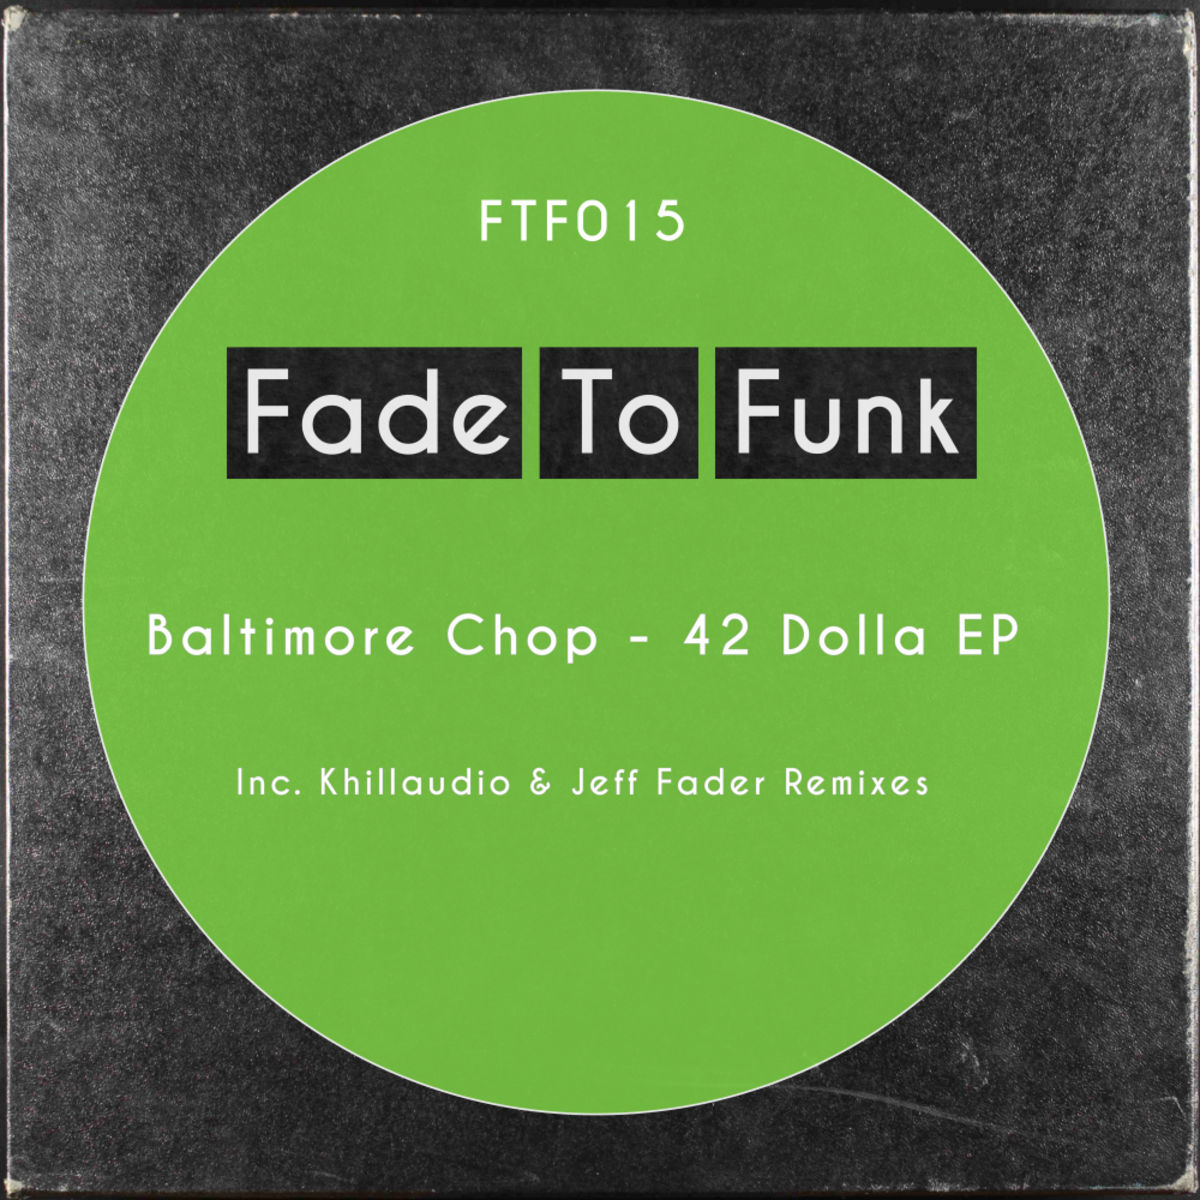 Baltimore Chop - 42 Dolla EP / Fade To Funk